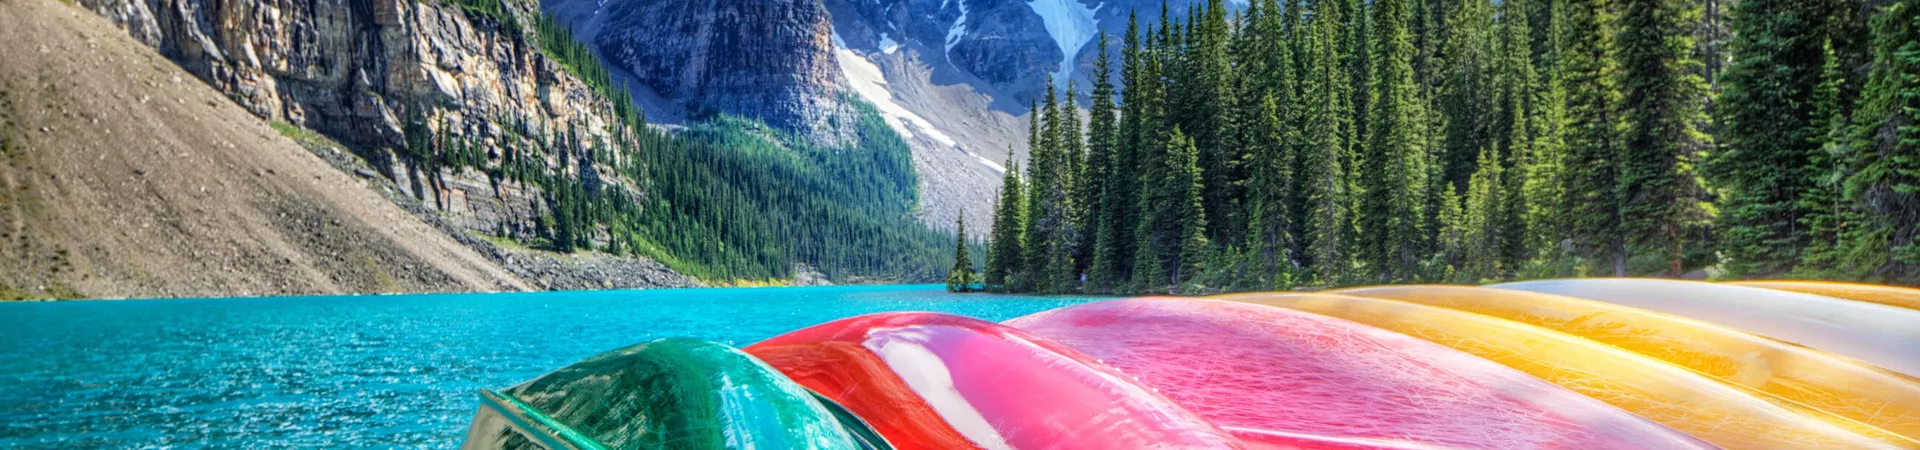 Canoes in Banff National Park, Canada